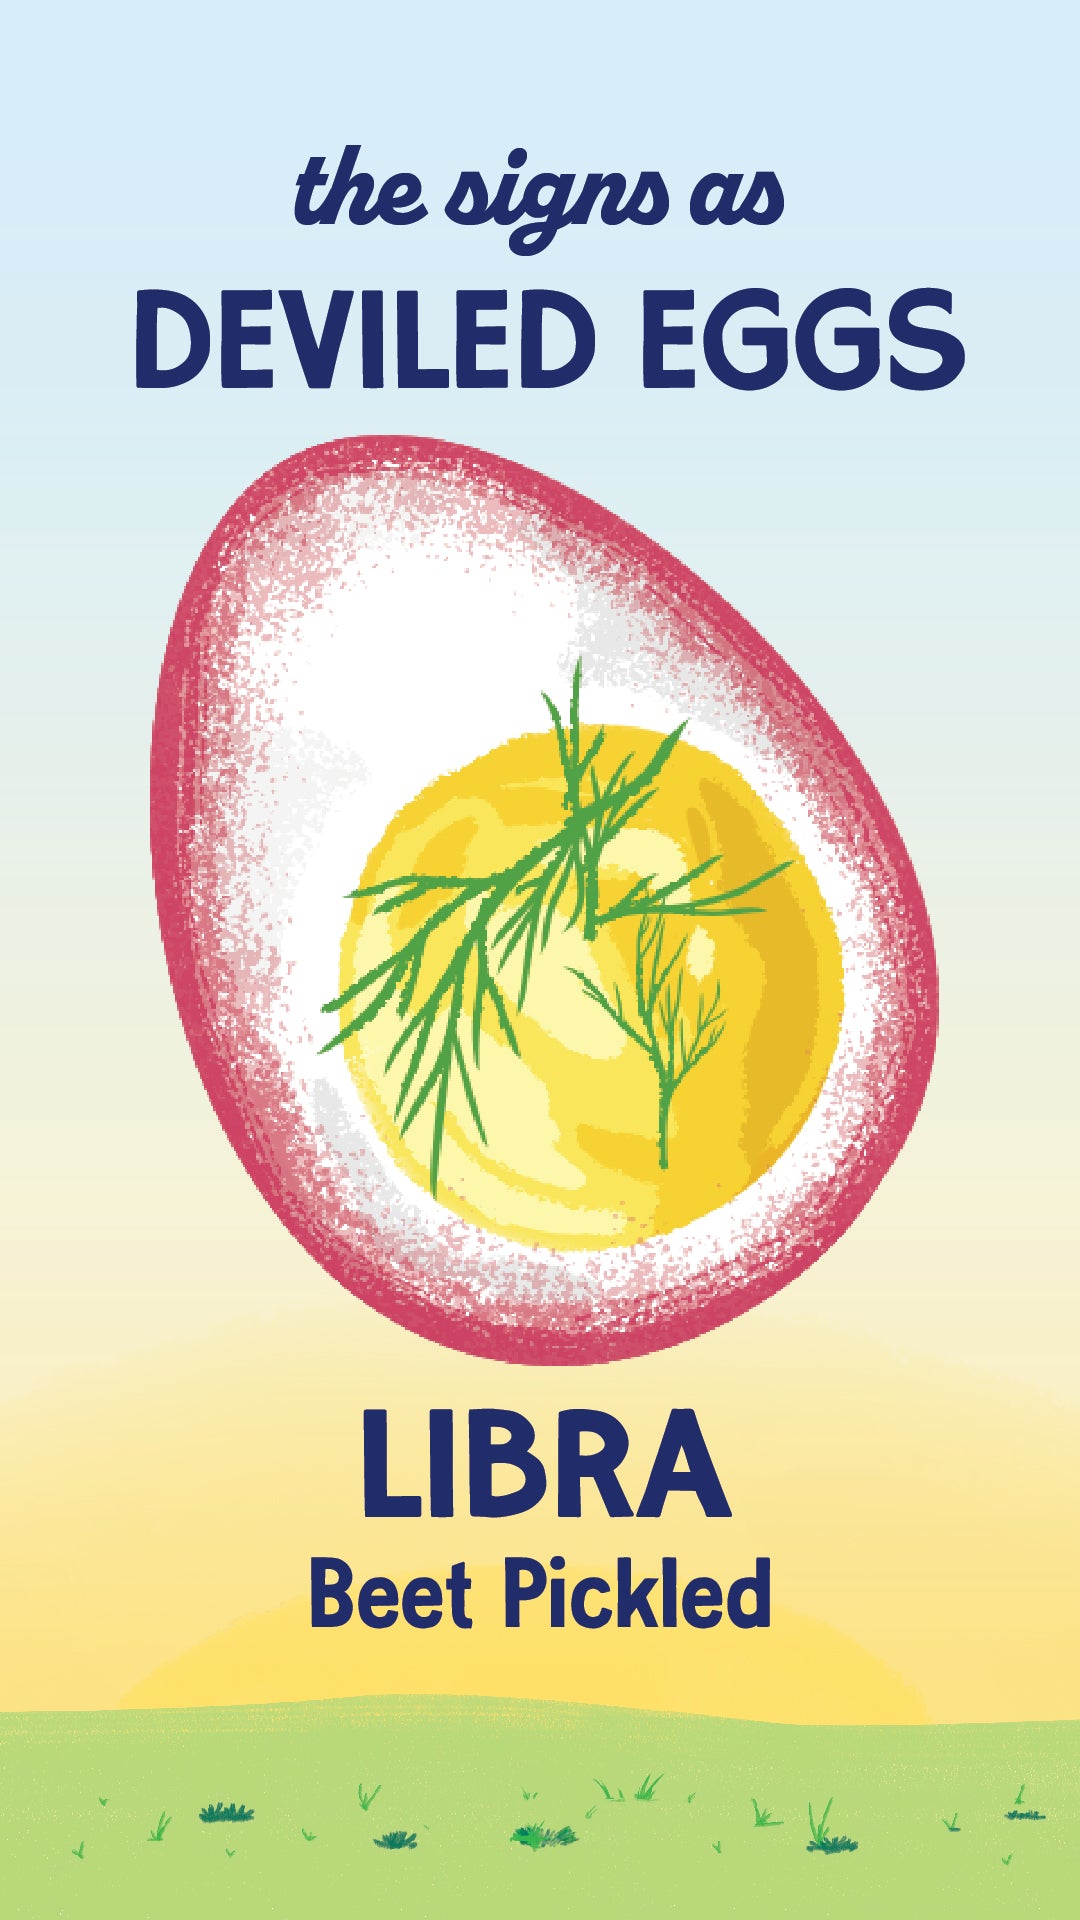 Illustration of zodiac sign Libra as a beet pickled deviled egg from recipe. | peteandgerrys.com